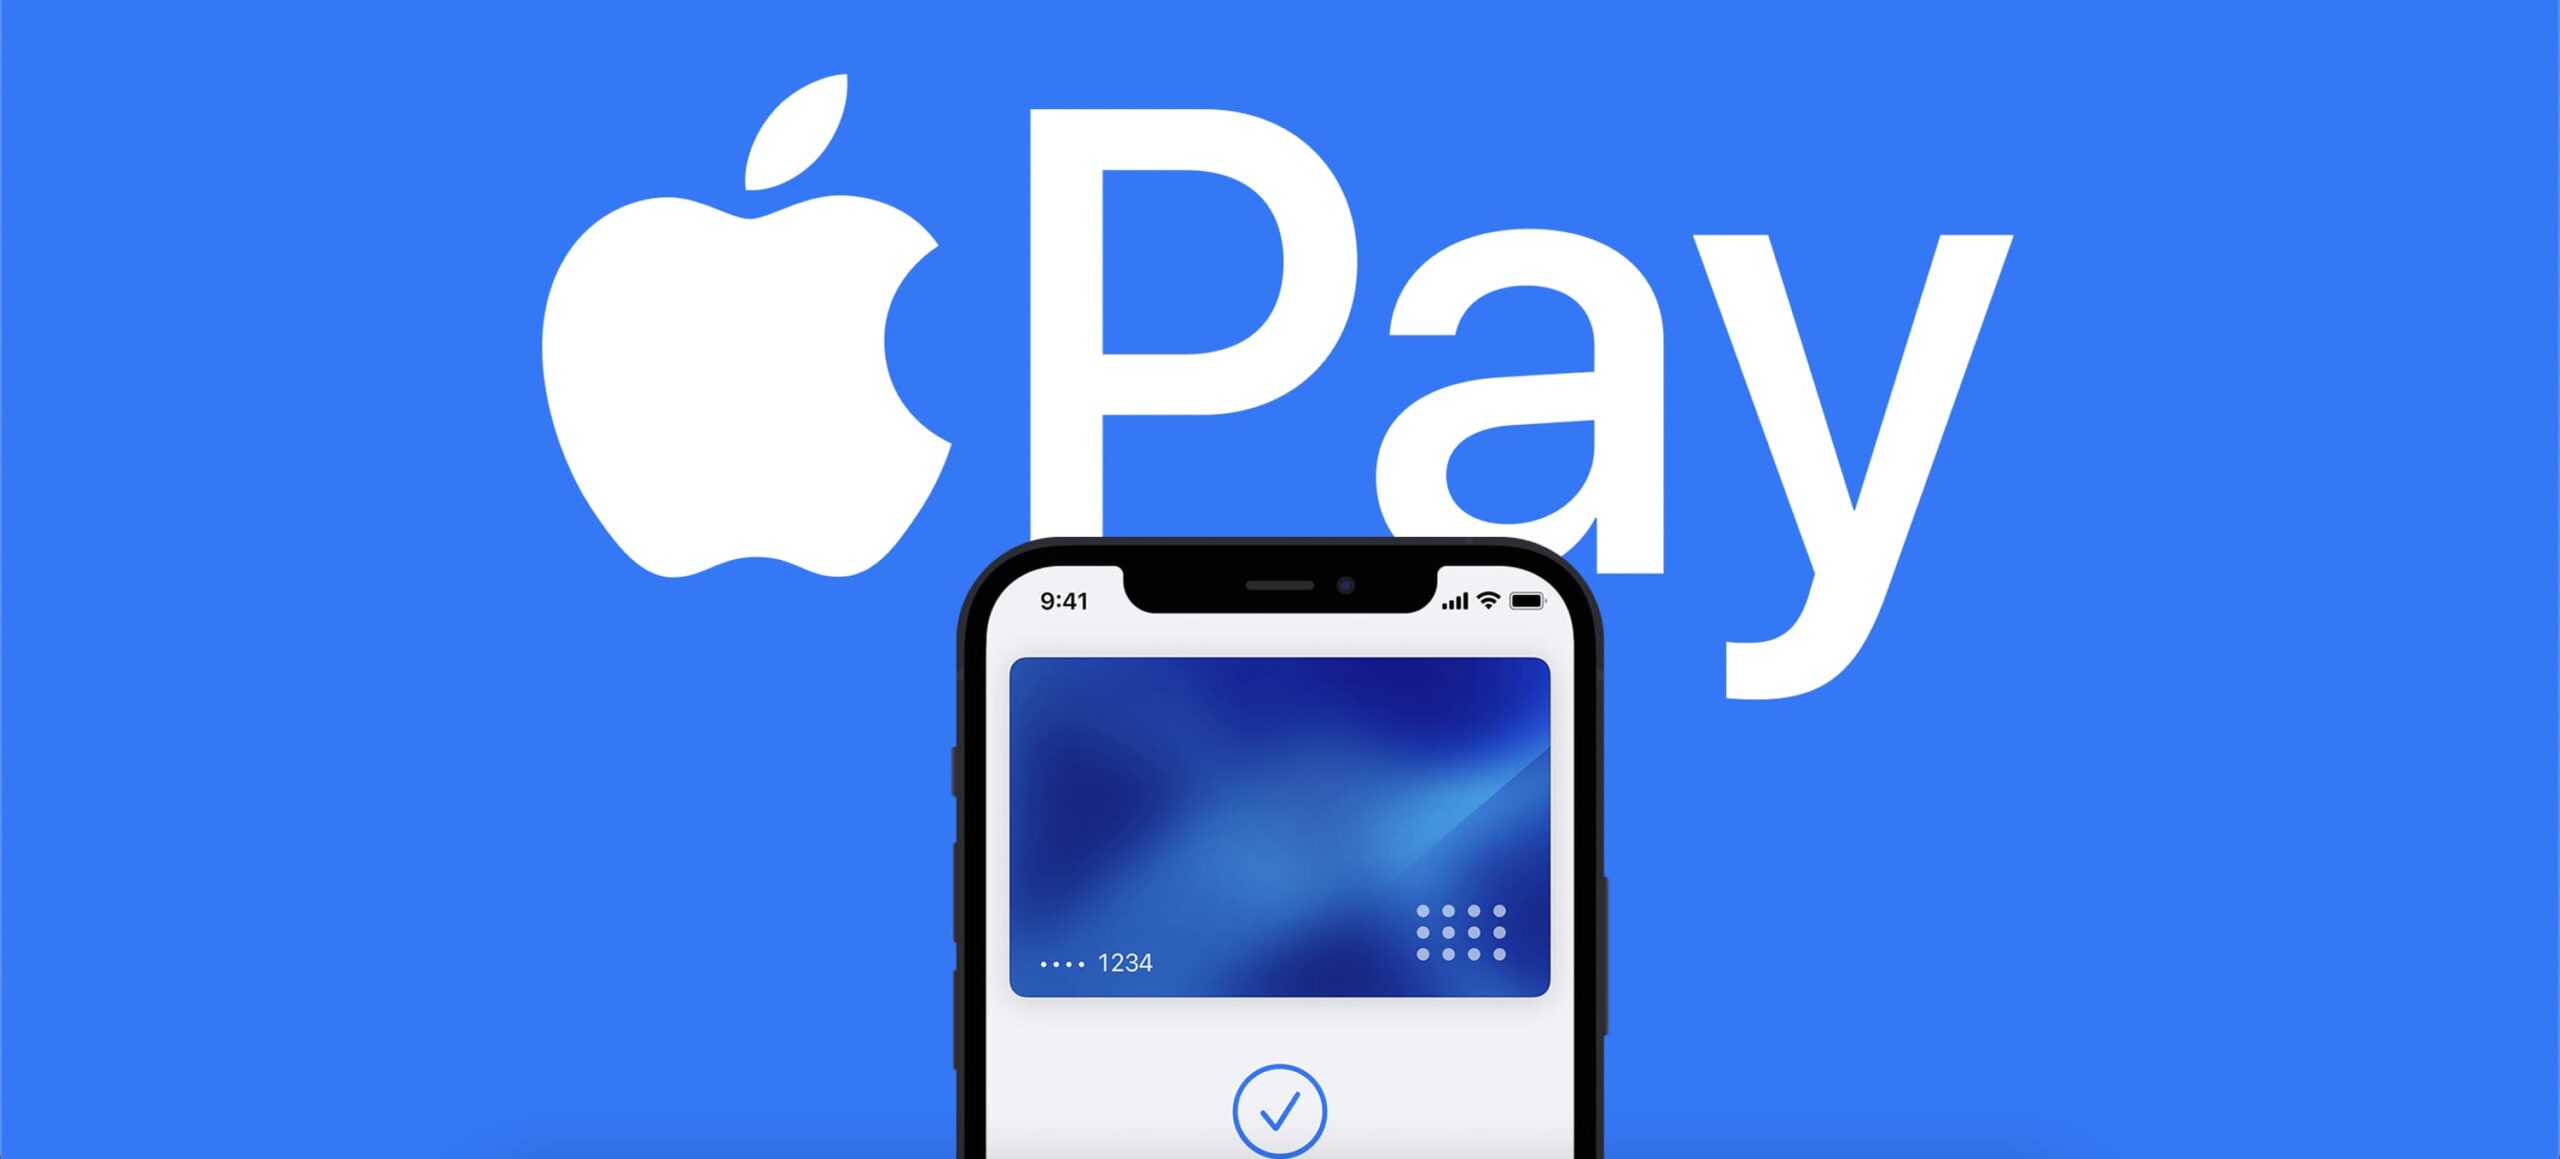 Apple Pay QR Code: Making Payments on iOS